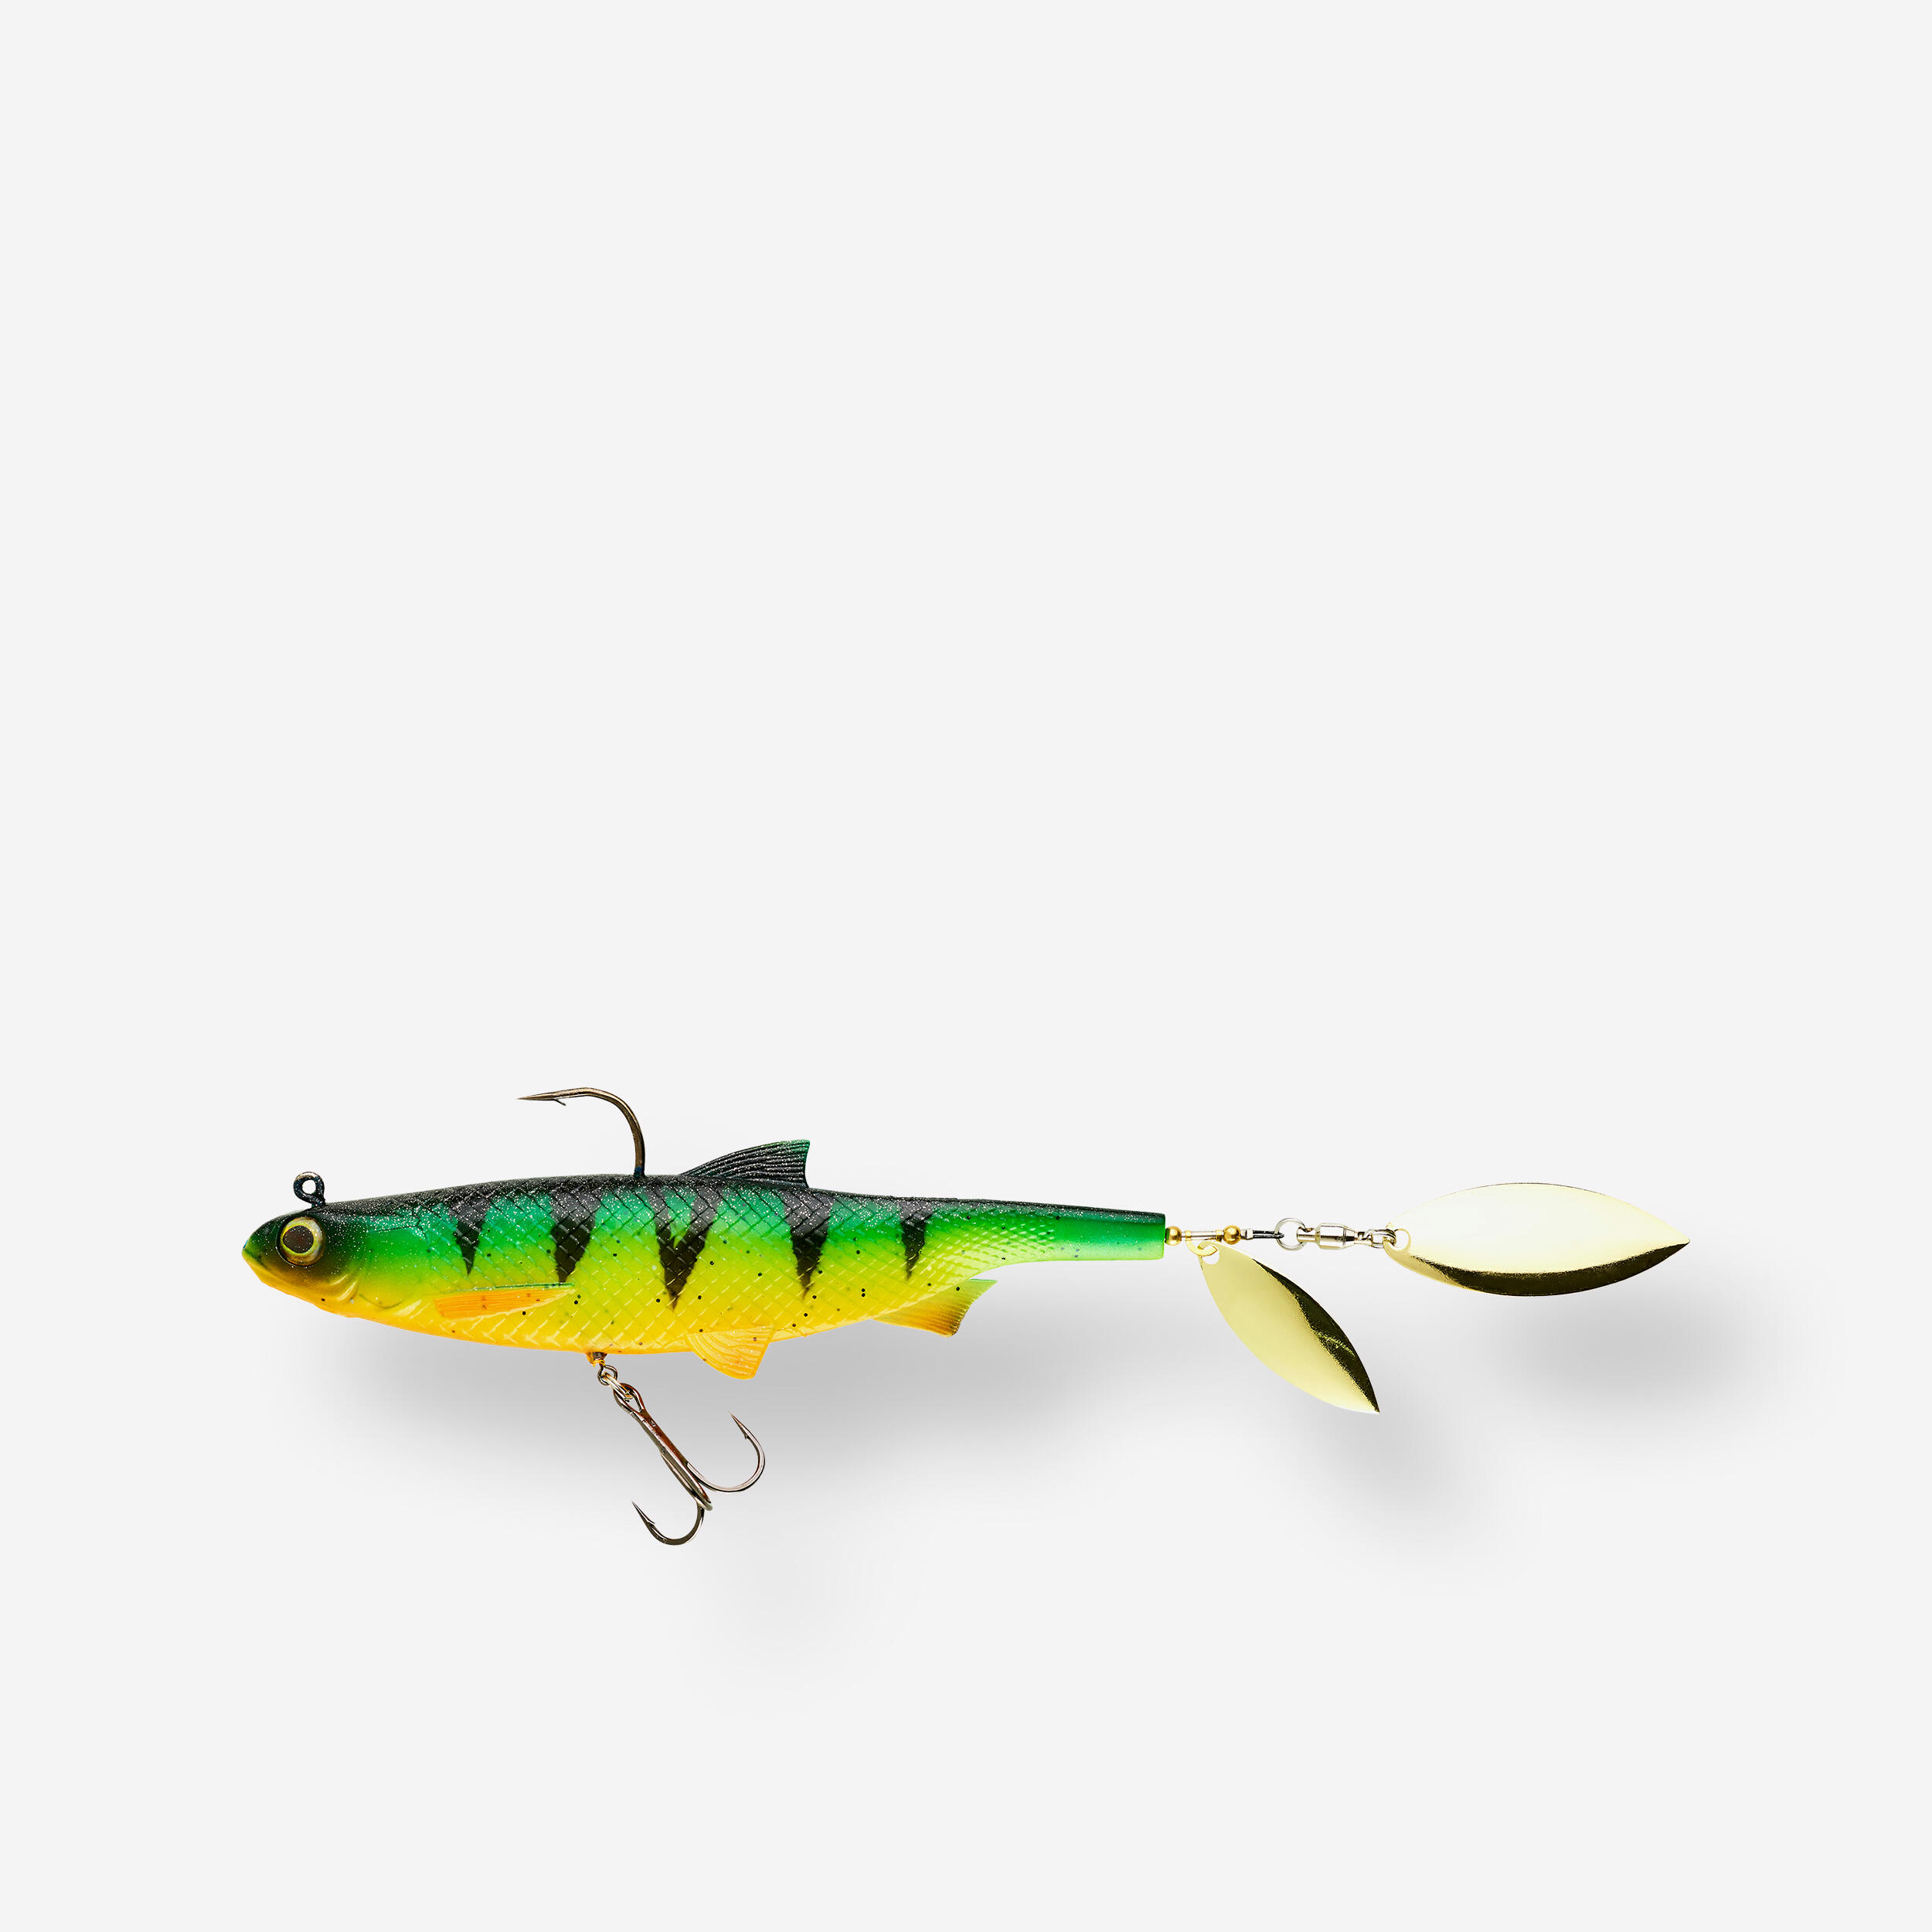 CAPERLAN LURE FISHING ROACHSPIN 150 FIRETIGER BLADED SHAD SOFT LURE